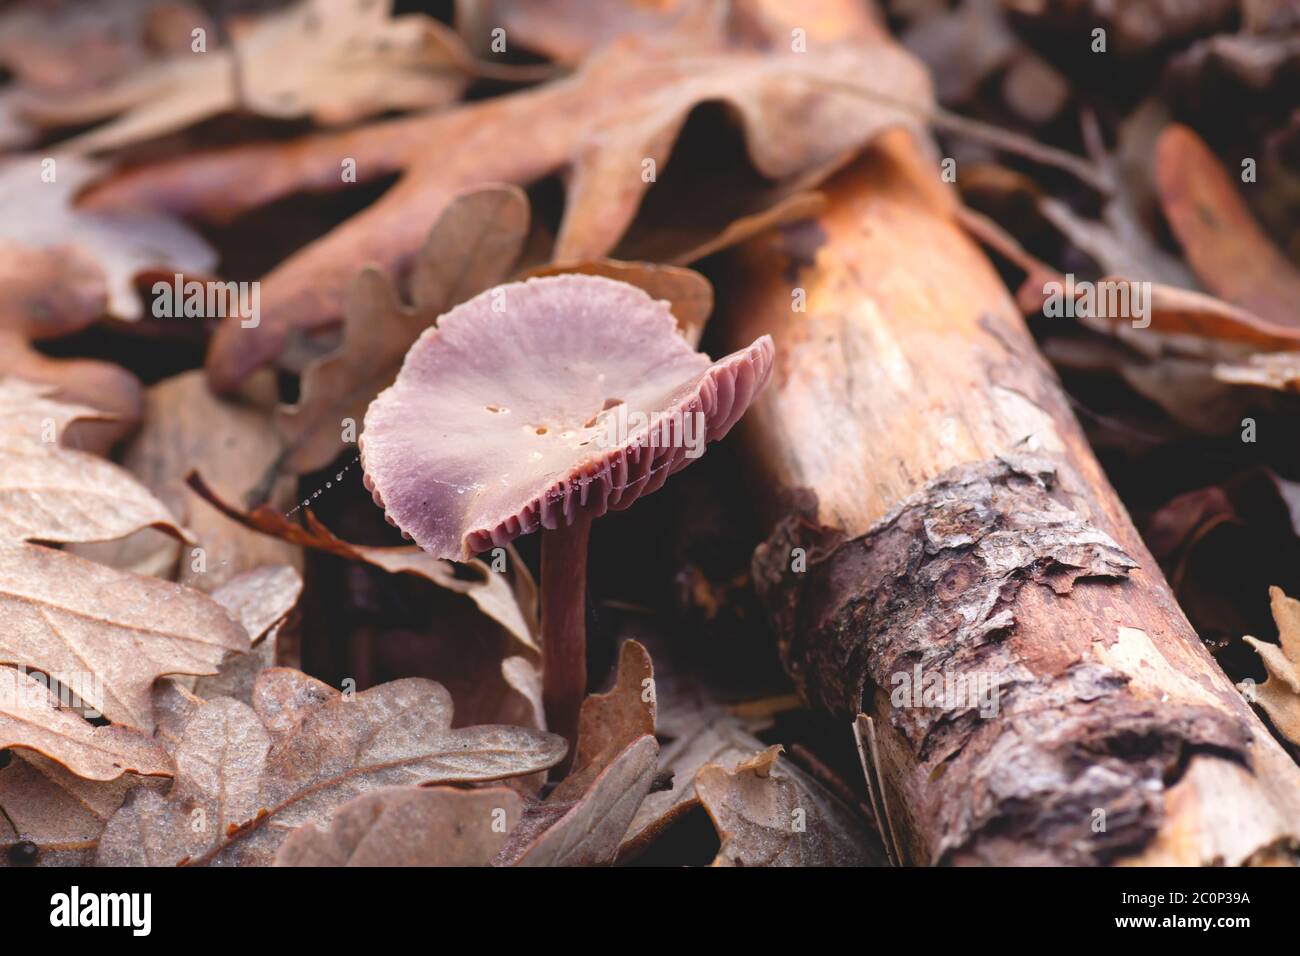 Laccaria amethystina, commonly known as the amethyst deceiver, wild purple colored mushrooms Stock Photo